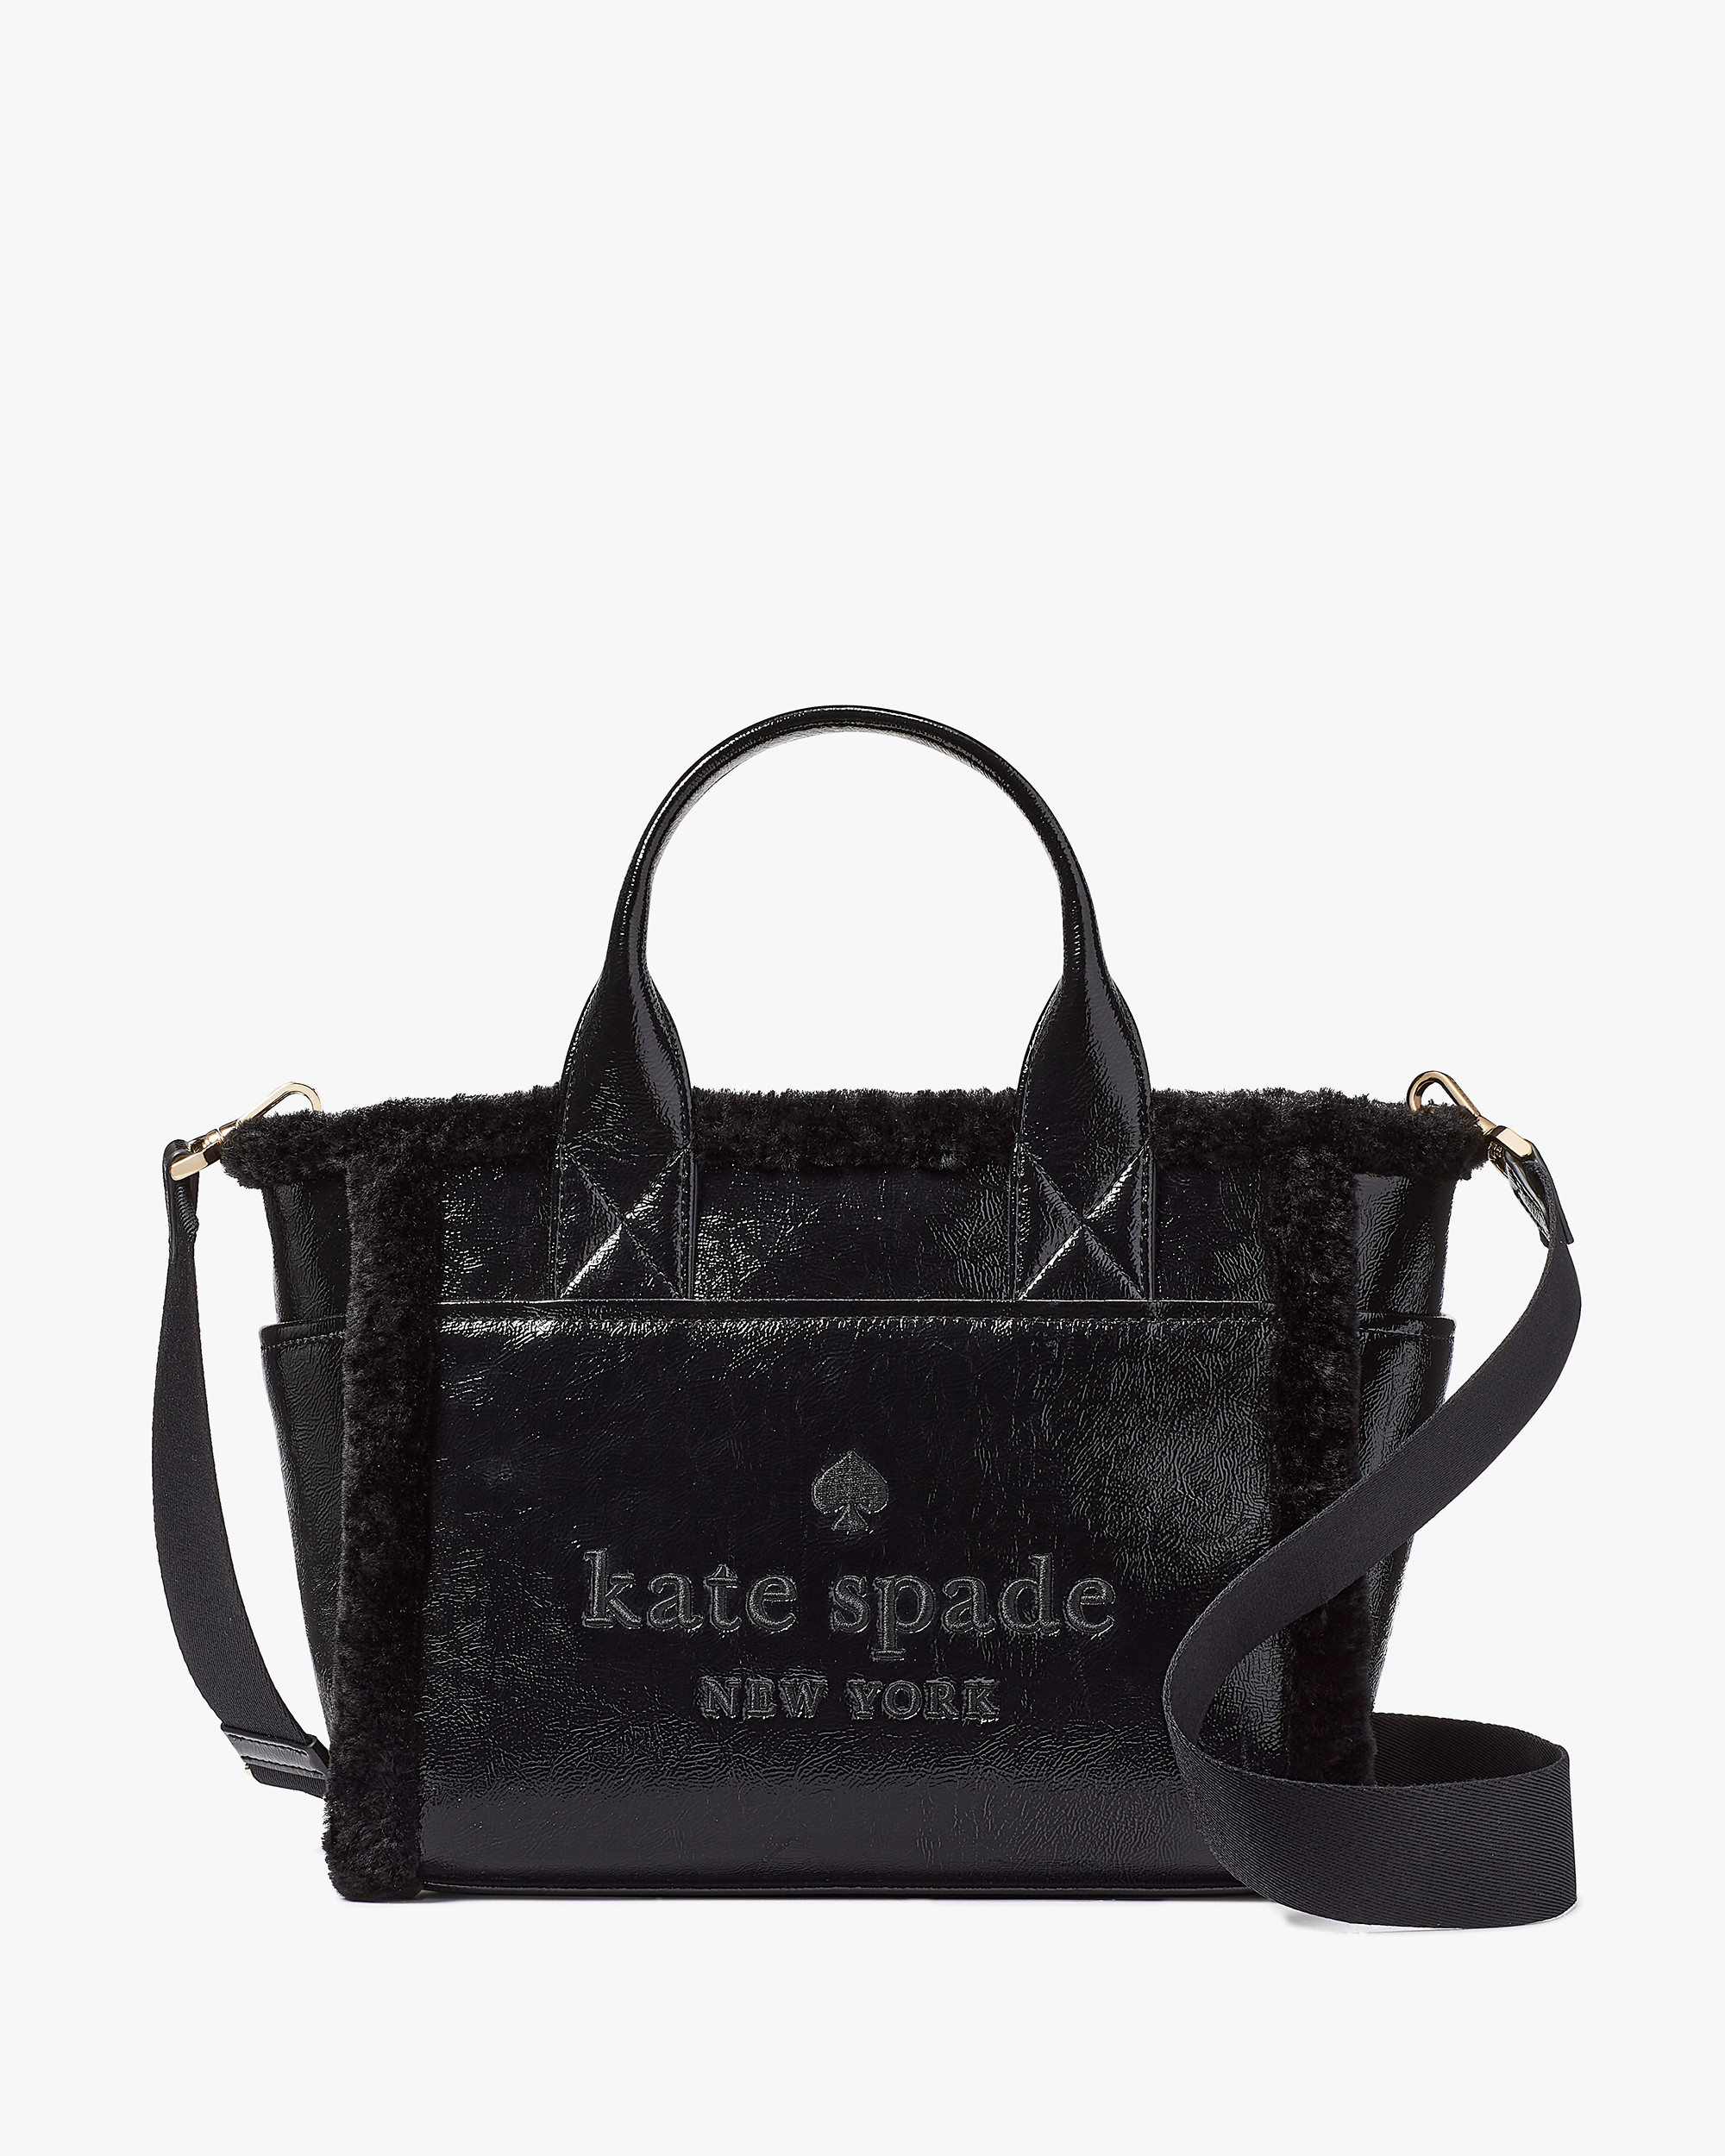 Kate Spade Jett Faux Shearling Small Tote